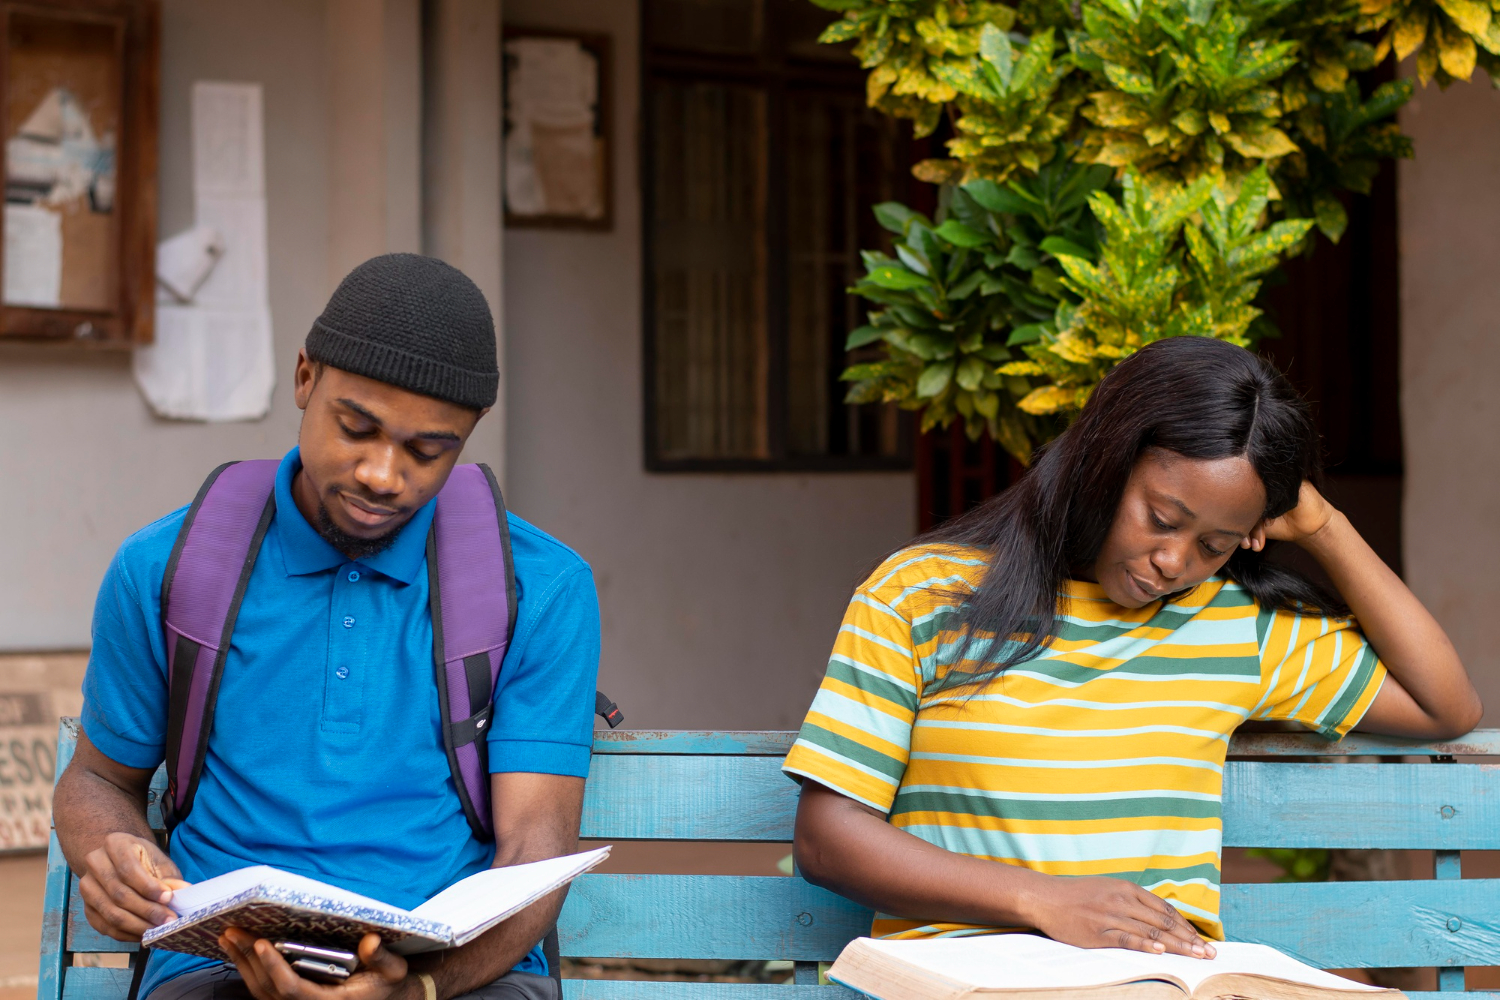 Nigerian students unable to pay their fees are being told to leave the UK